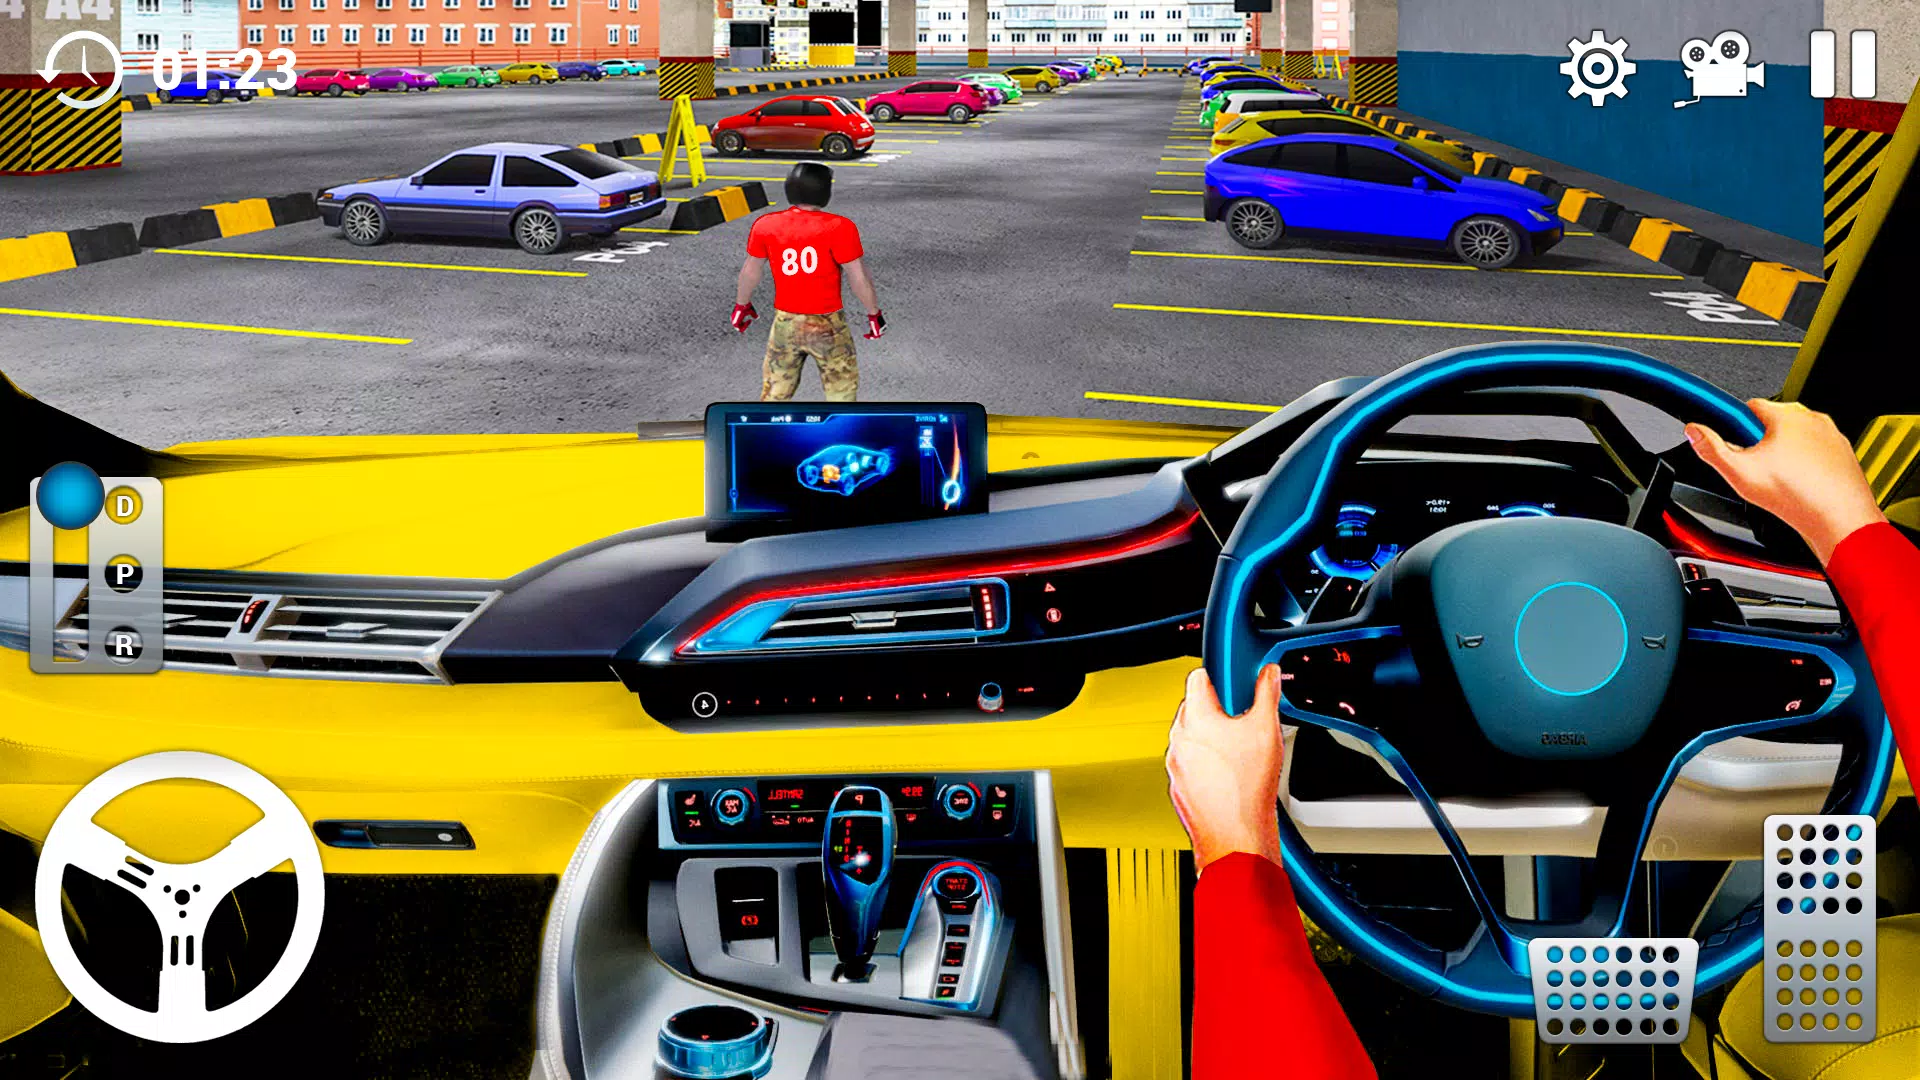 Car Parking Game Car Games 3D APK for Android Download